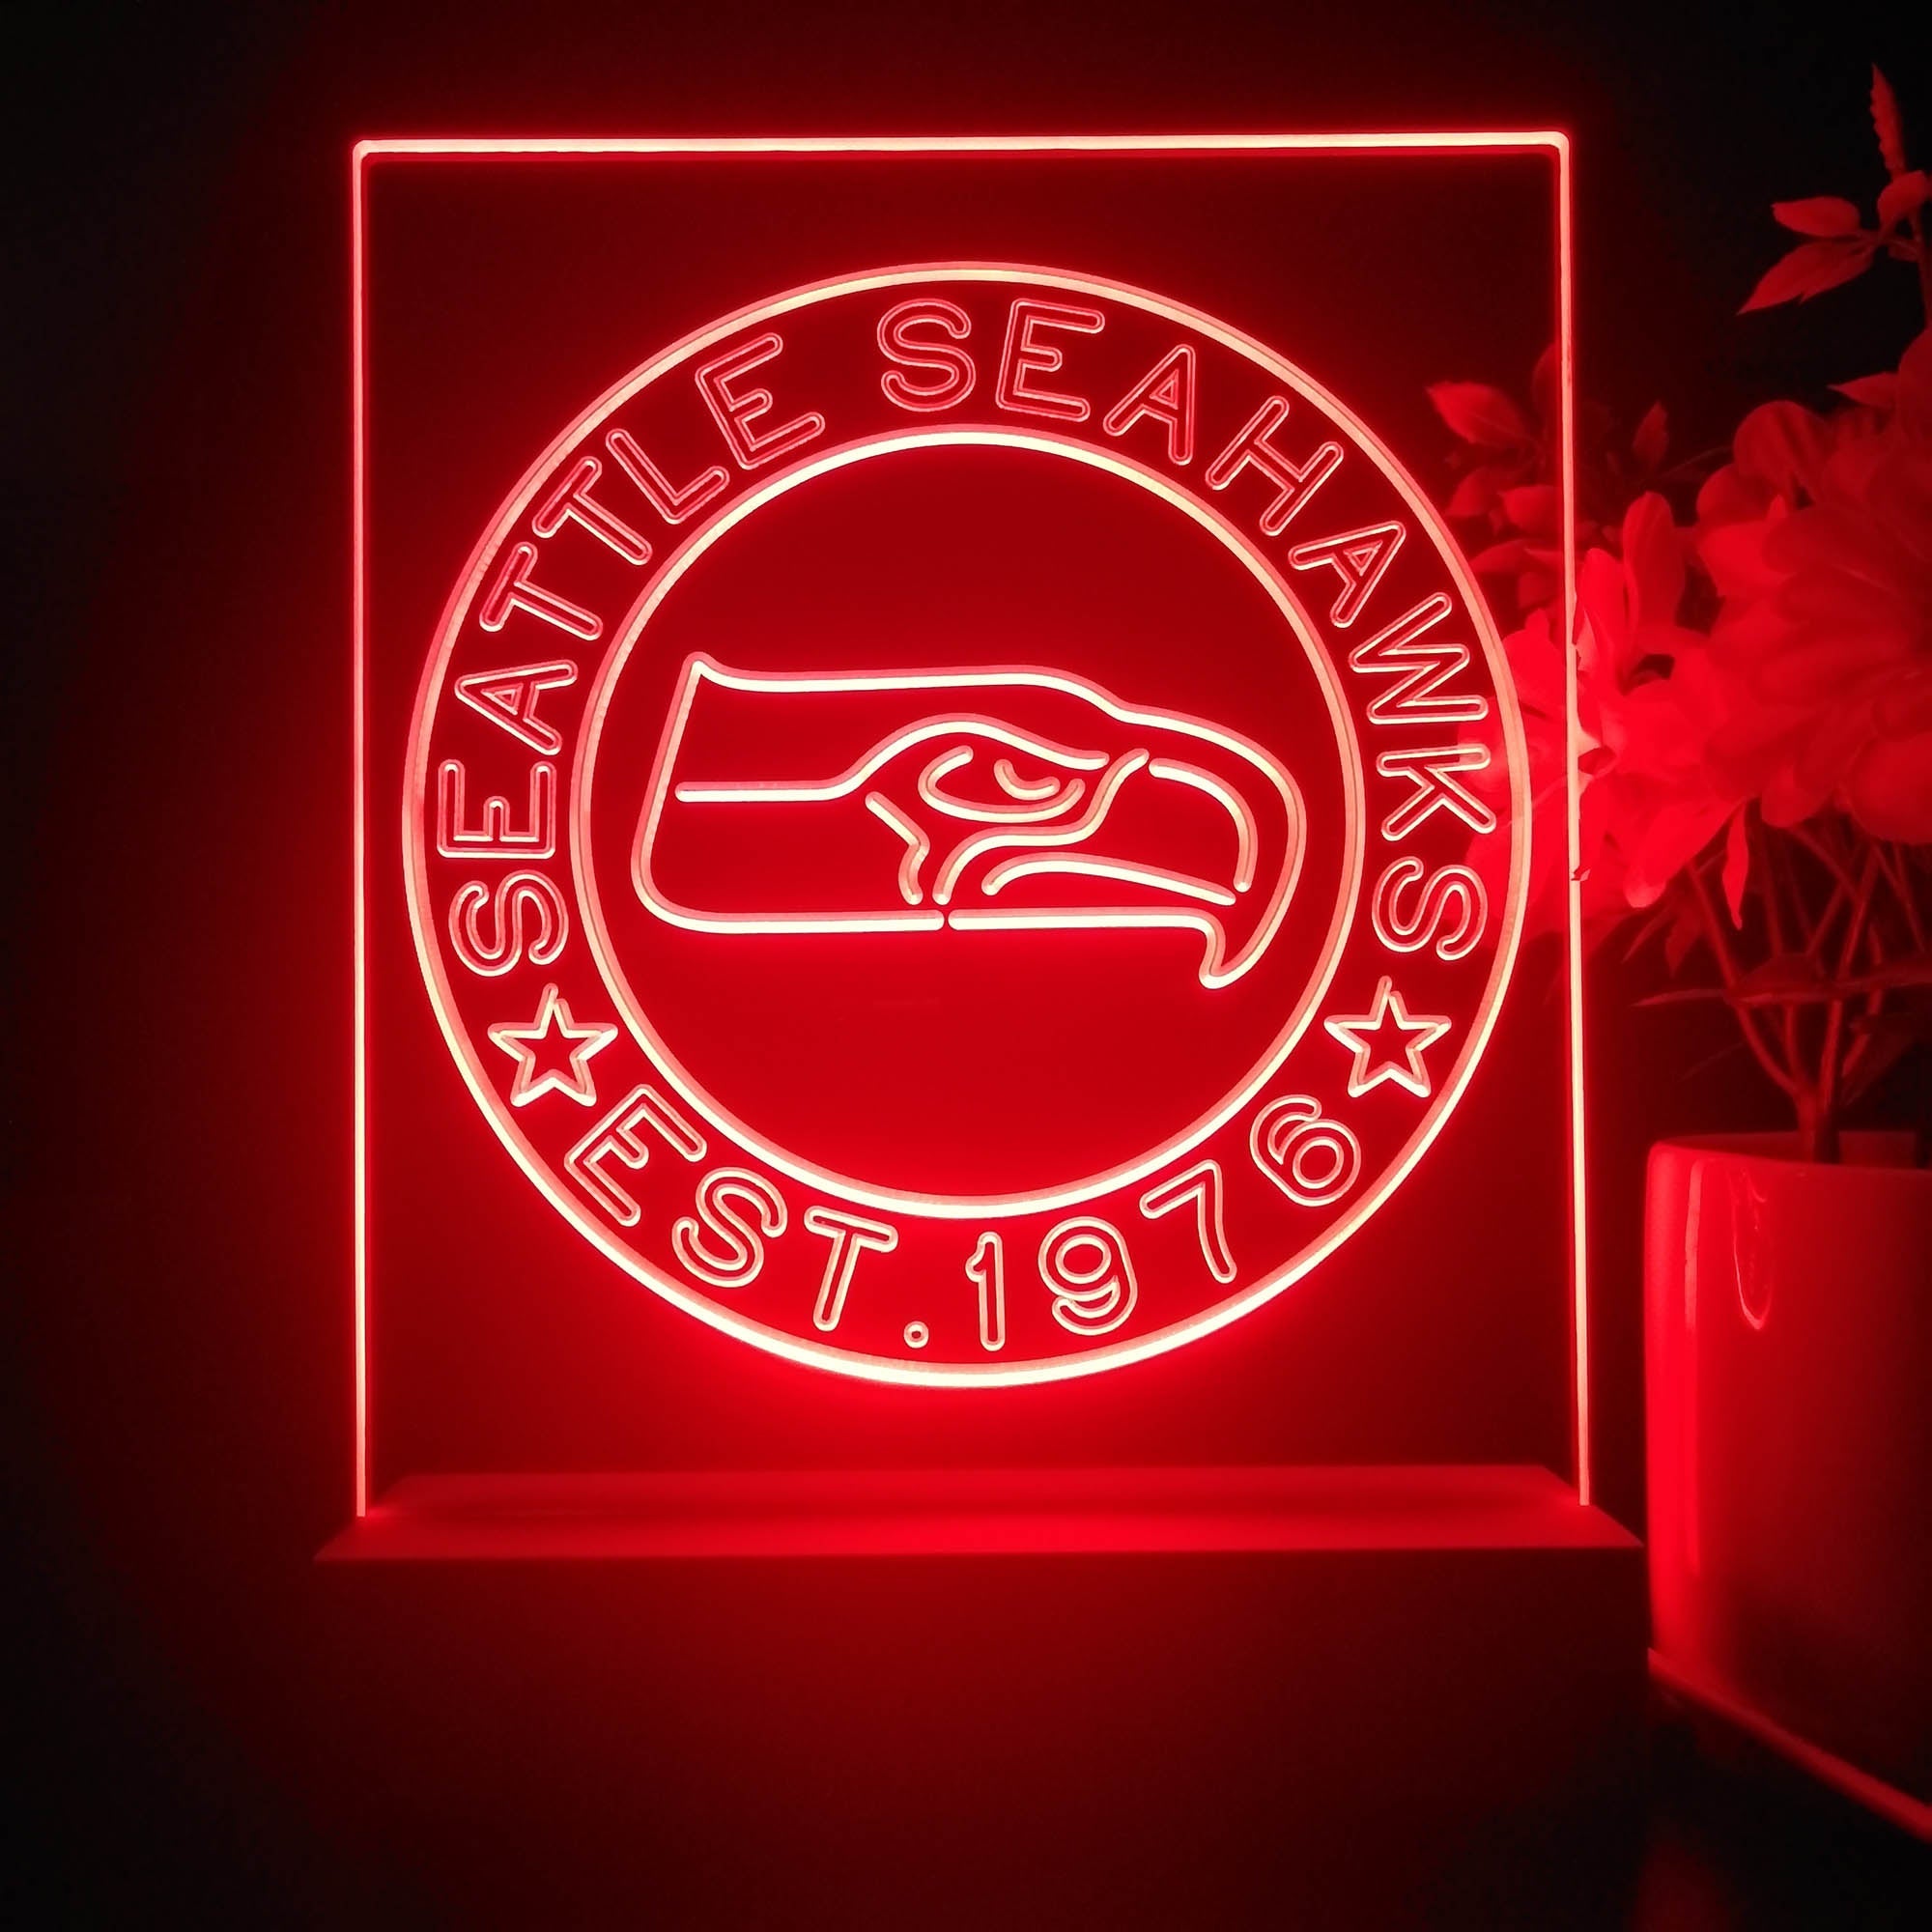 Personalized Seattle Seahawks Souvenir Neon LED Night Light Sign